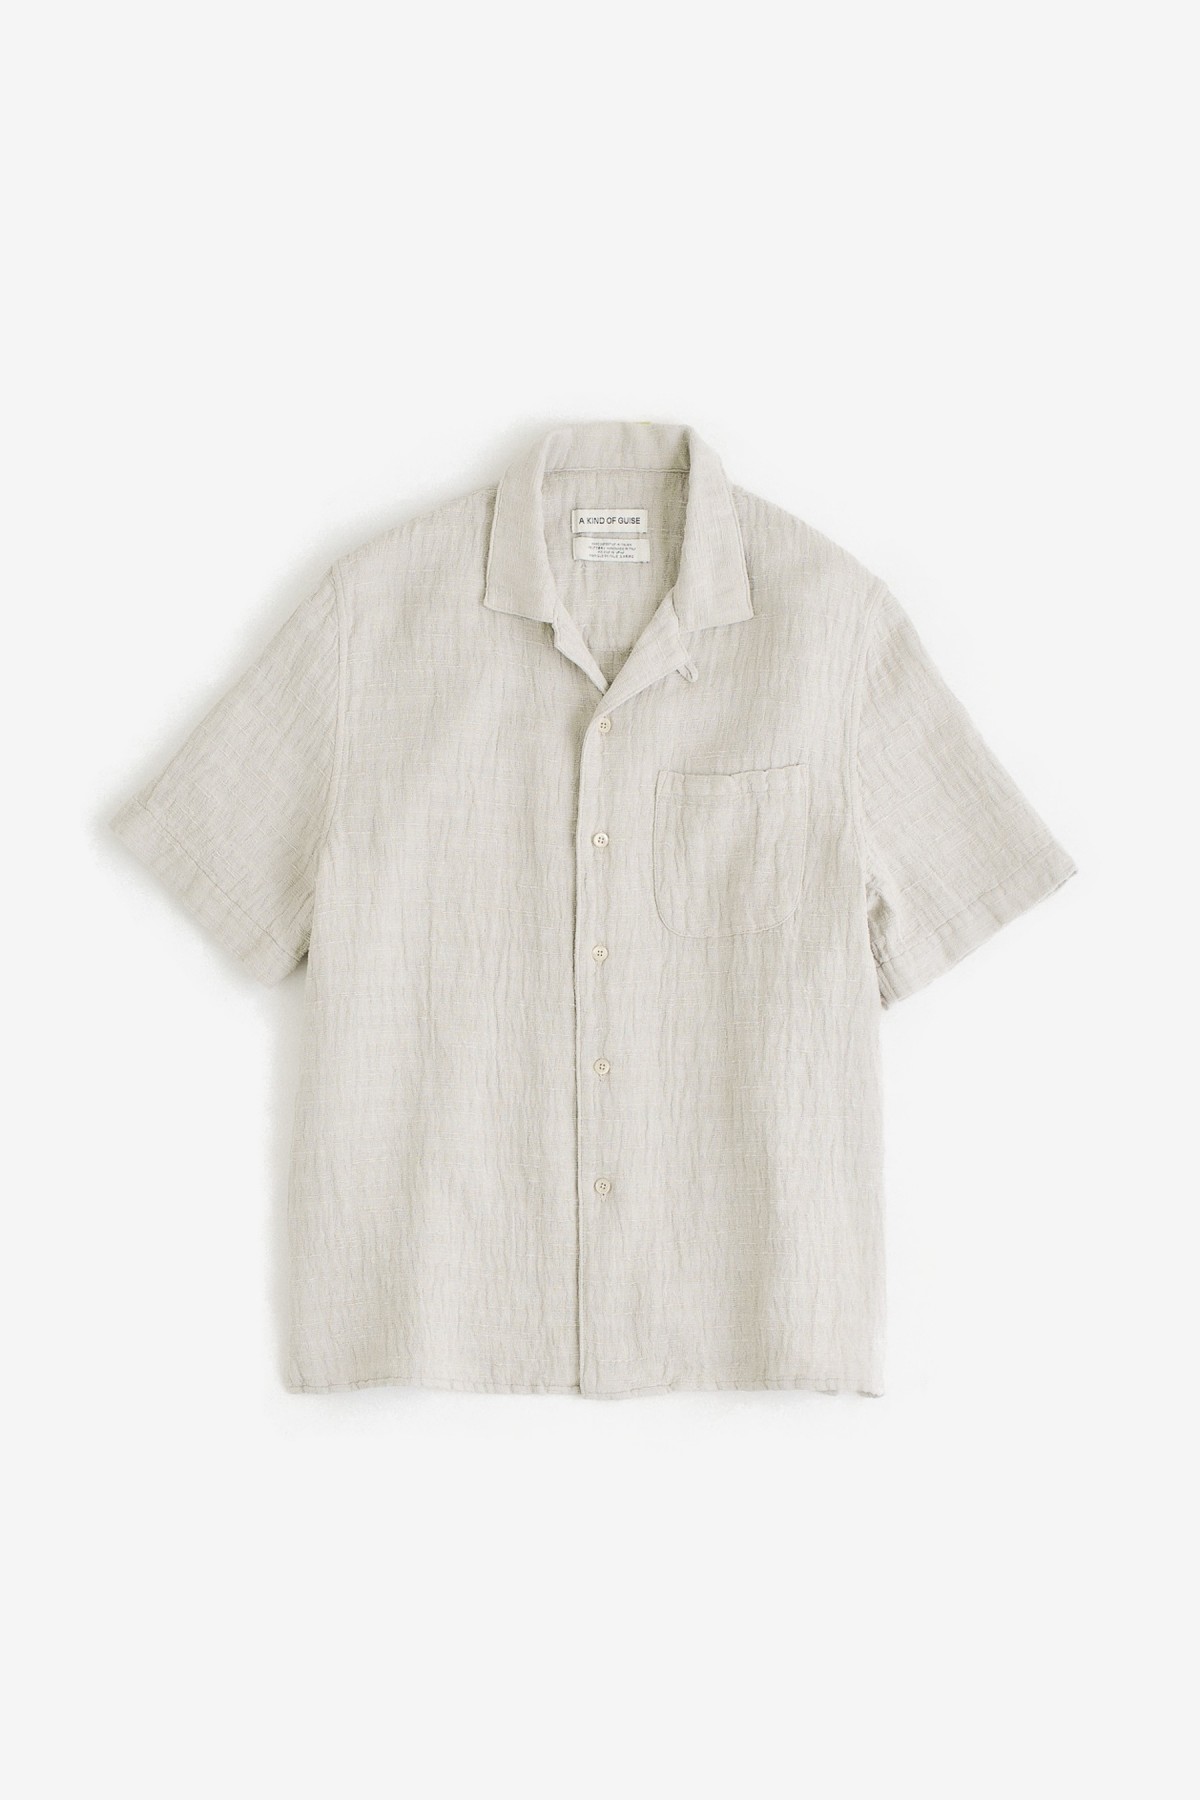 A Kind of Guise Gioia Shirt in Washed Day